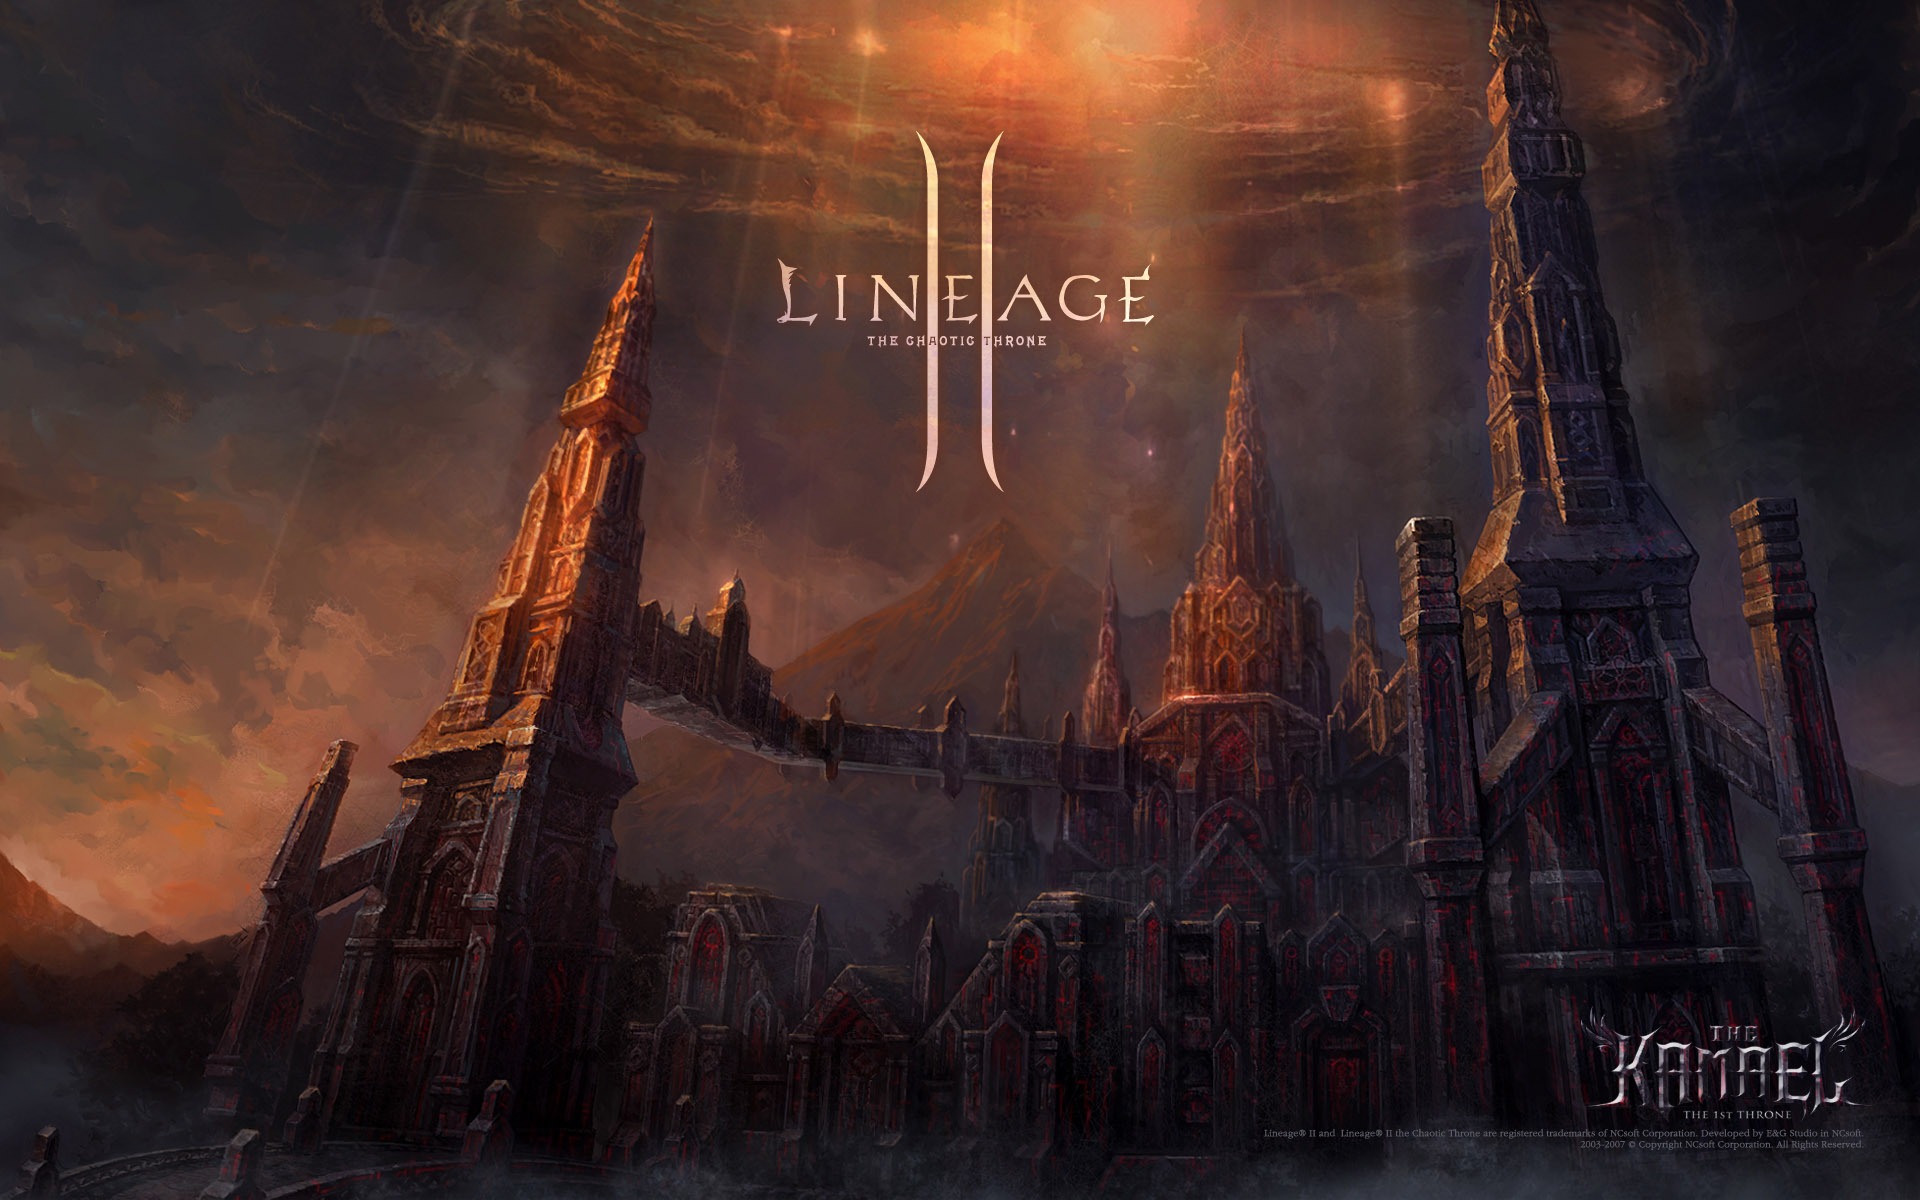 LINEAGE Ⅱ Modellierung HD-Gaming-Wallpaper #4 - 1920x1200